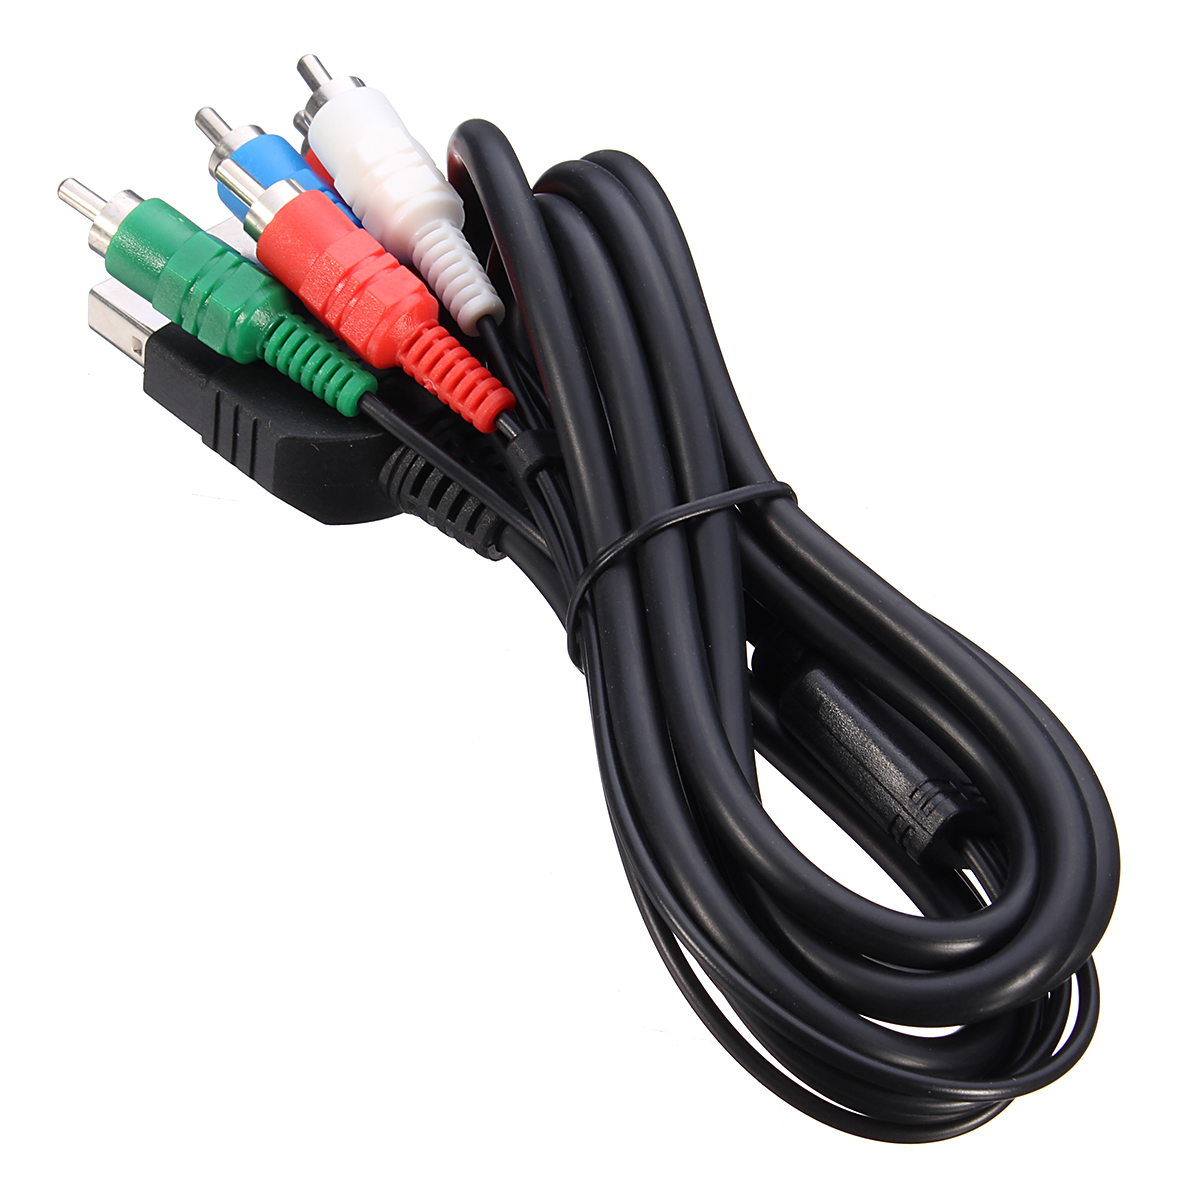 HD TV Component Composite 5 RCA AC Stereo Sound Audio Video Cable Cord for XBOX 8